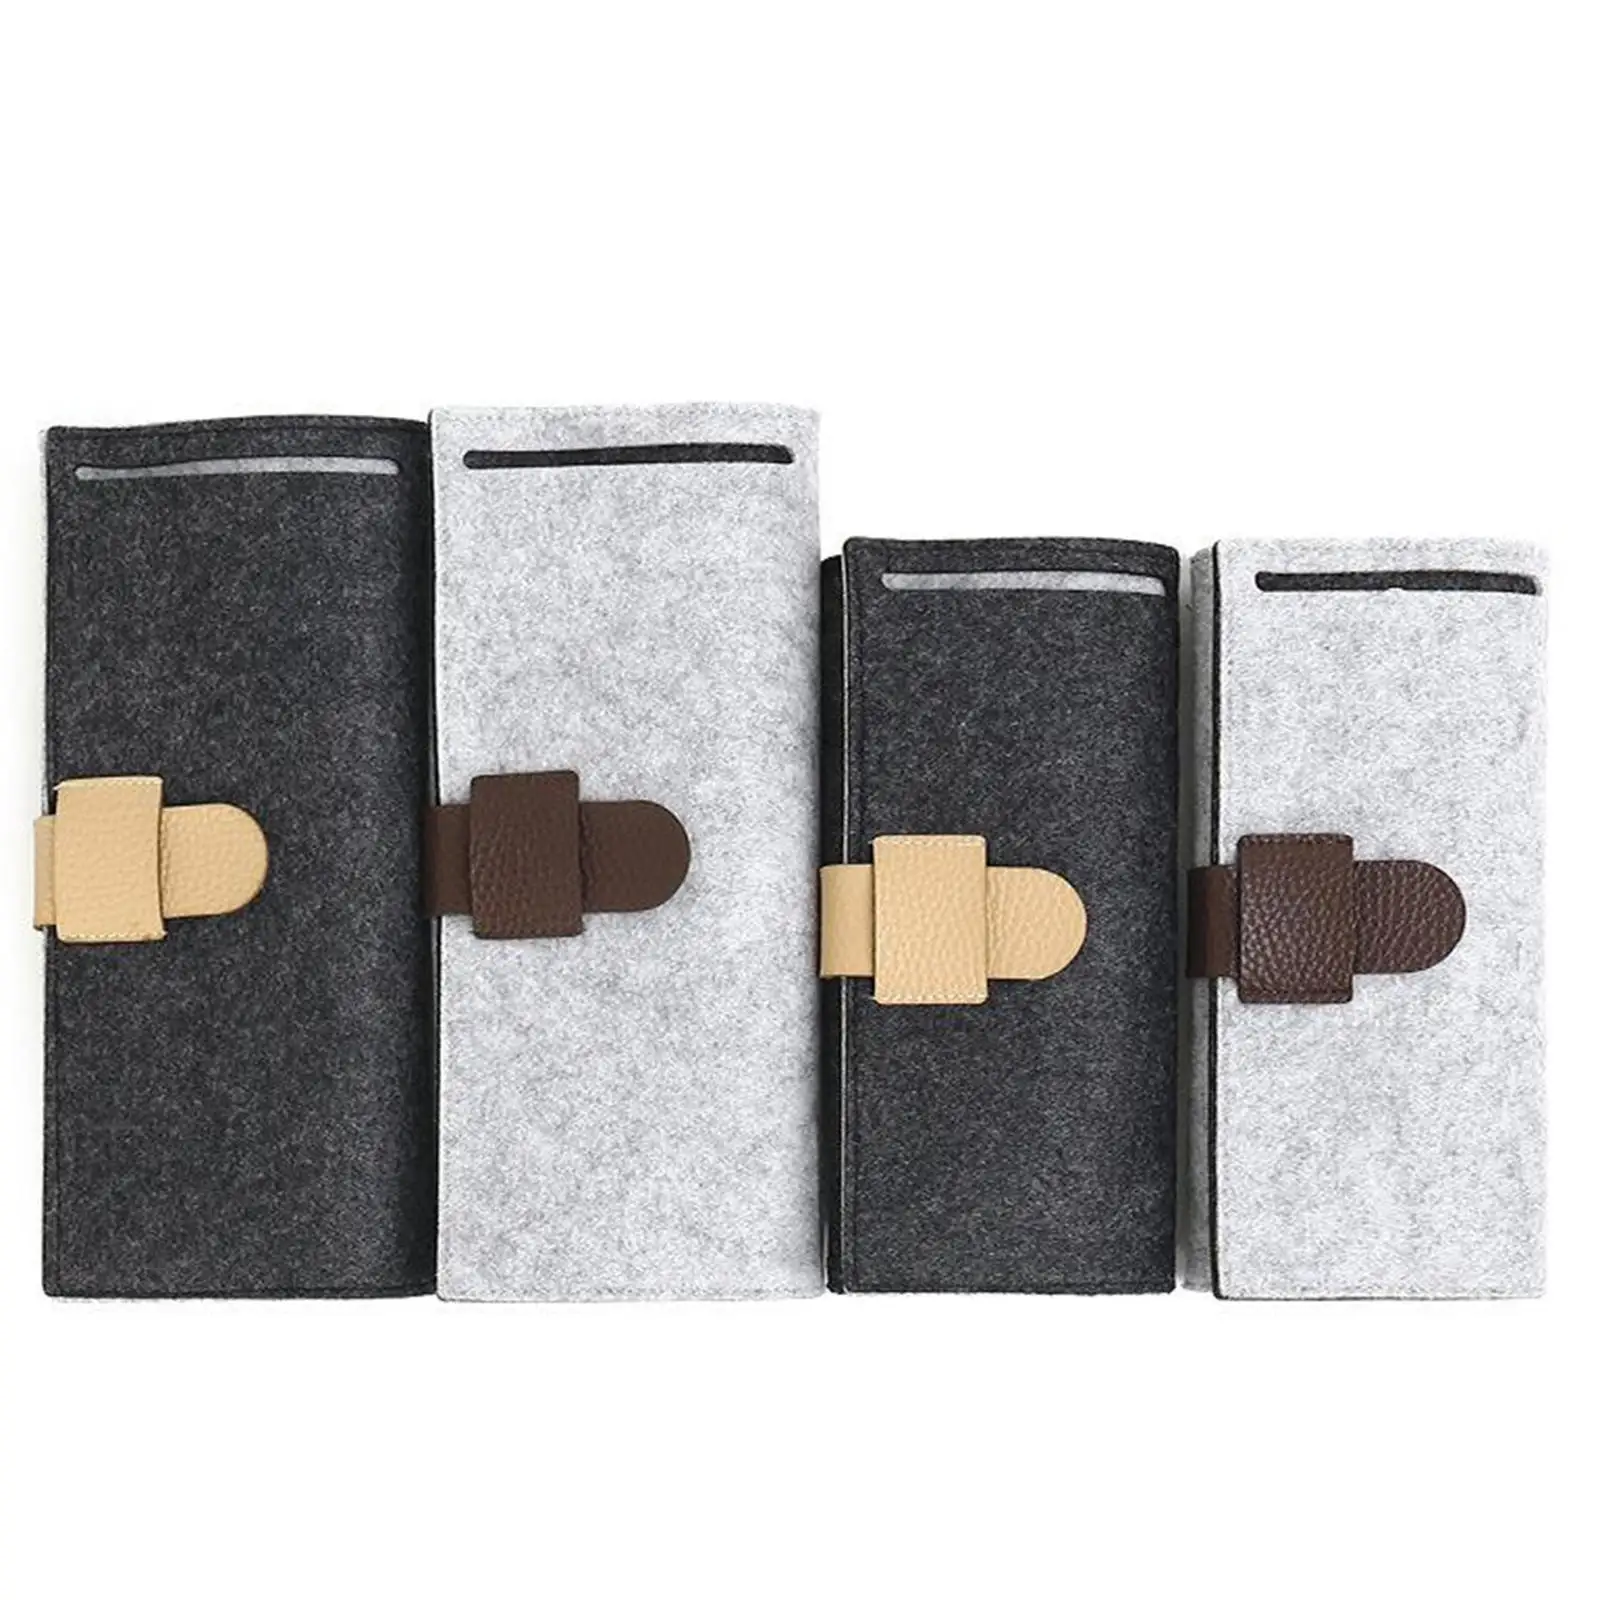 Foldable Secure Roll Jewelry Storage Bag Non-Woven Fabric Compact for Travel